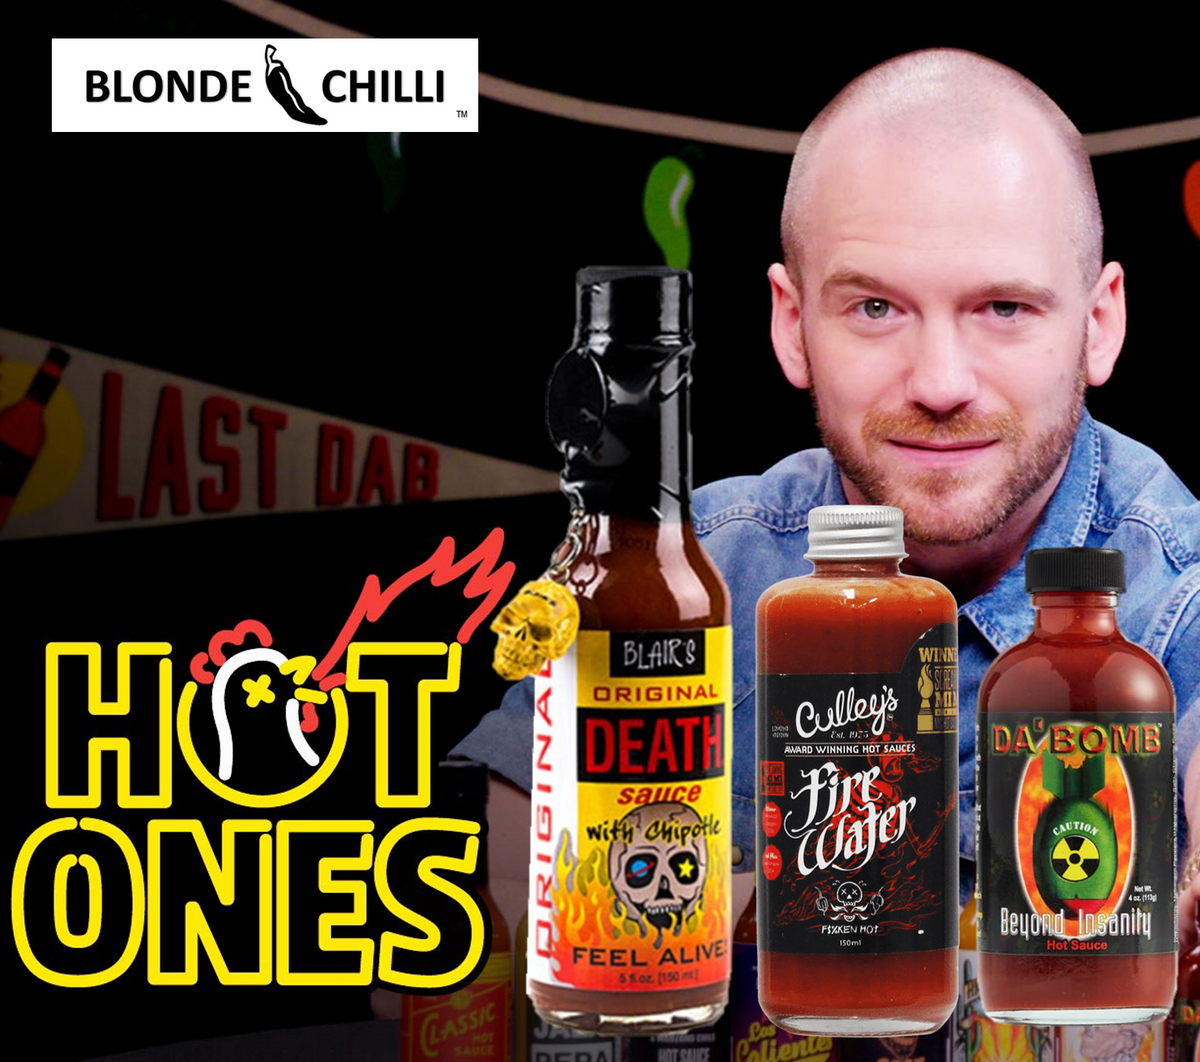 Host your own Hot Ones hot sauce challenge now with this spicy